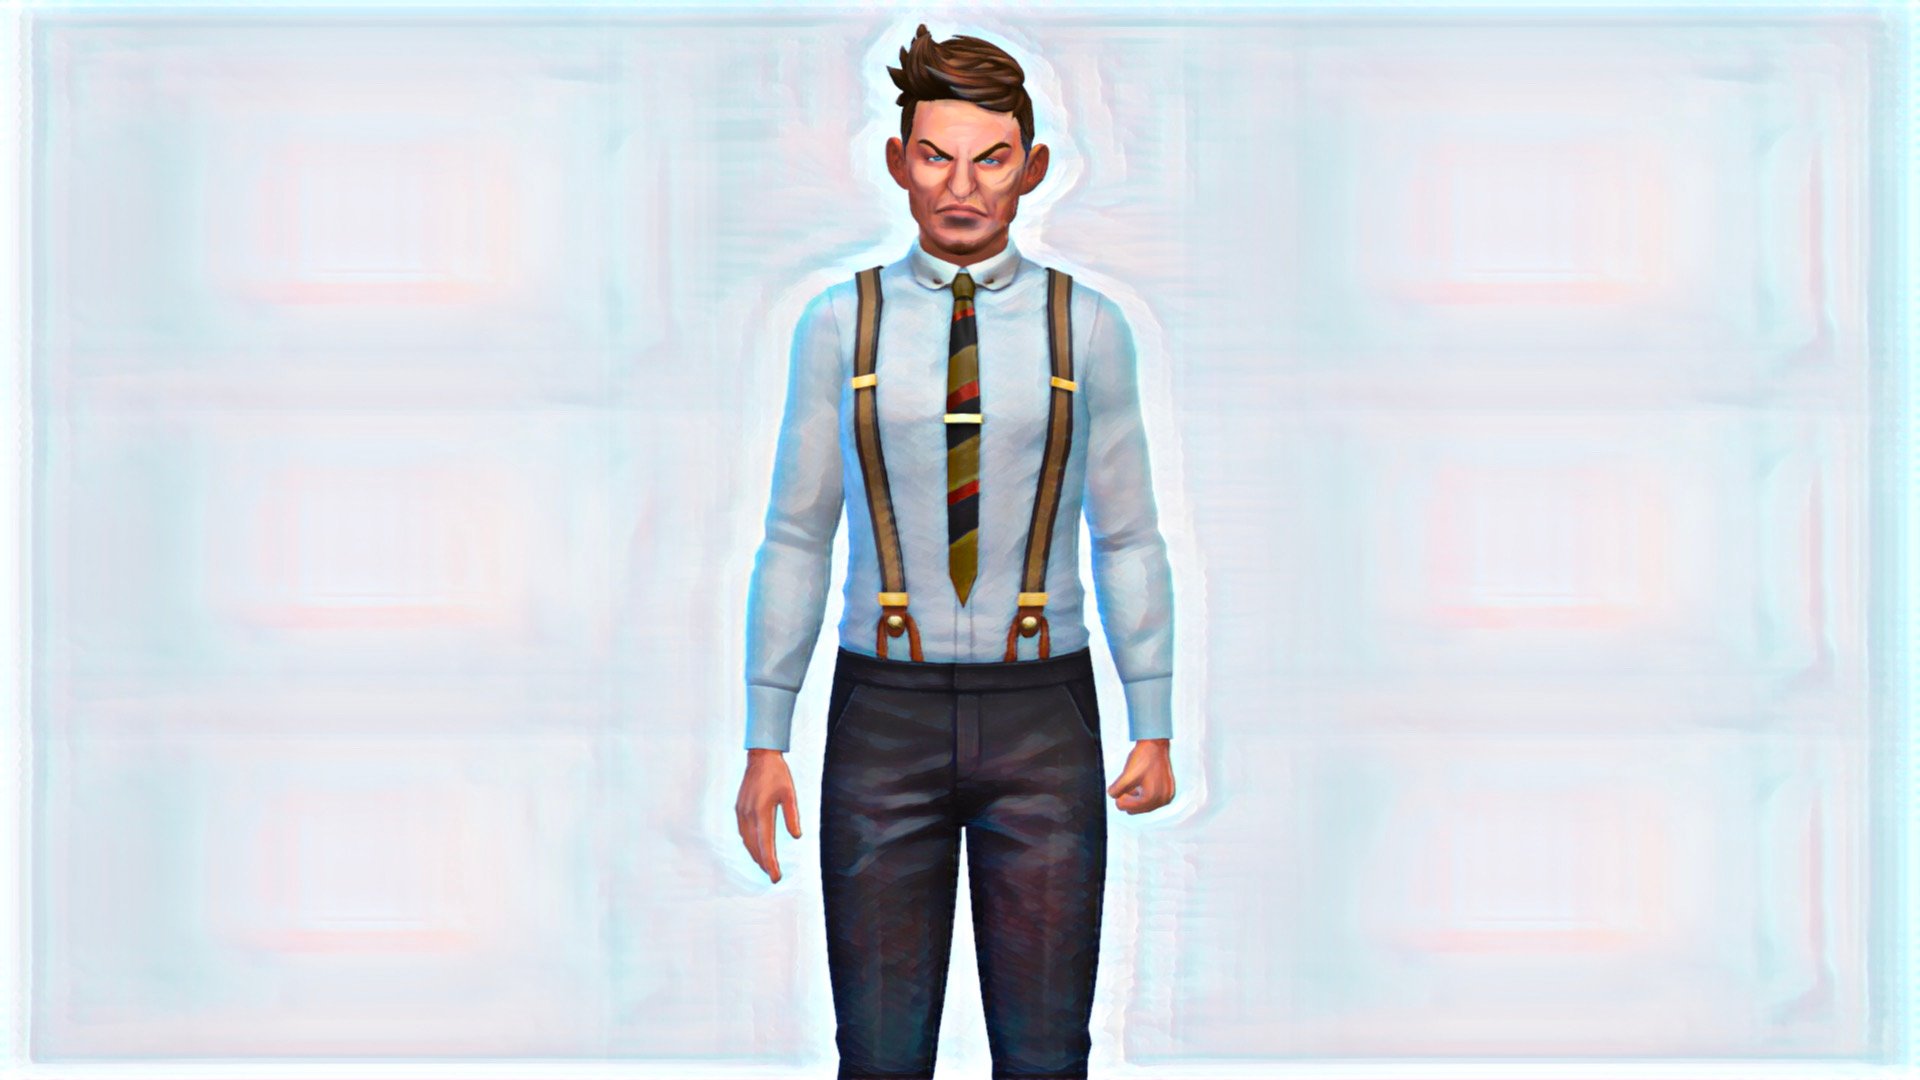 Mlog: Characters - The Sims 4 - Sims - LoversLab